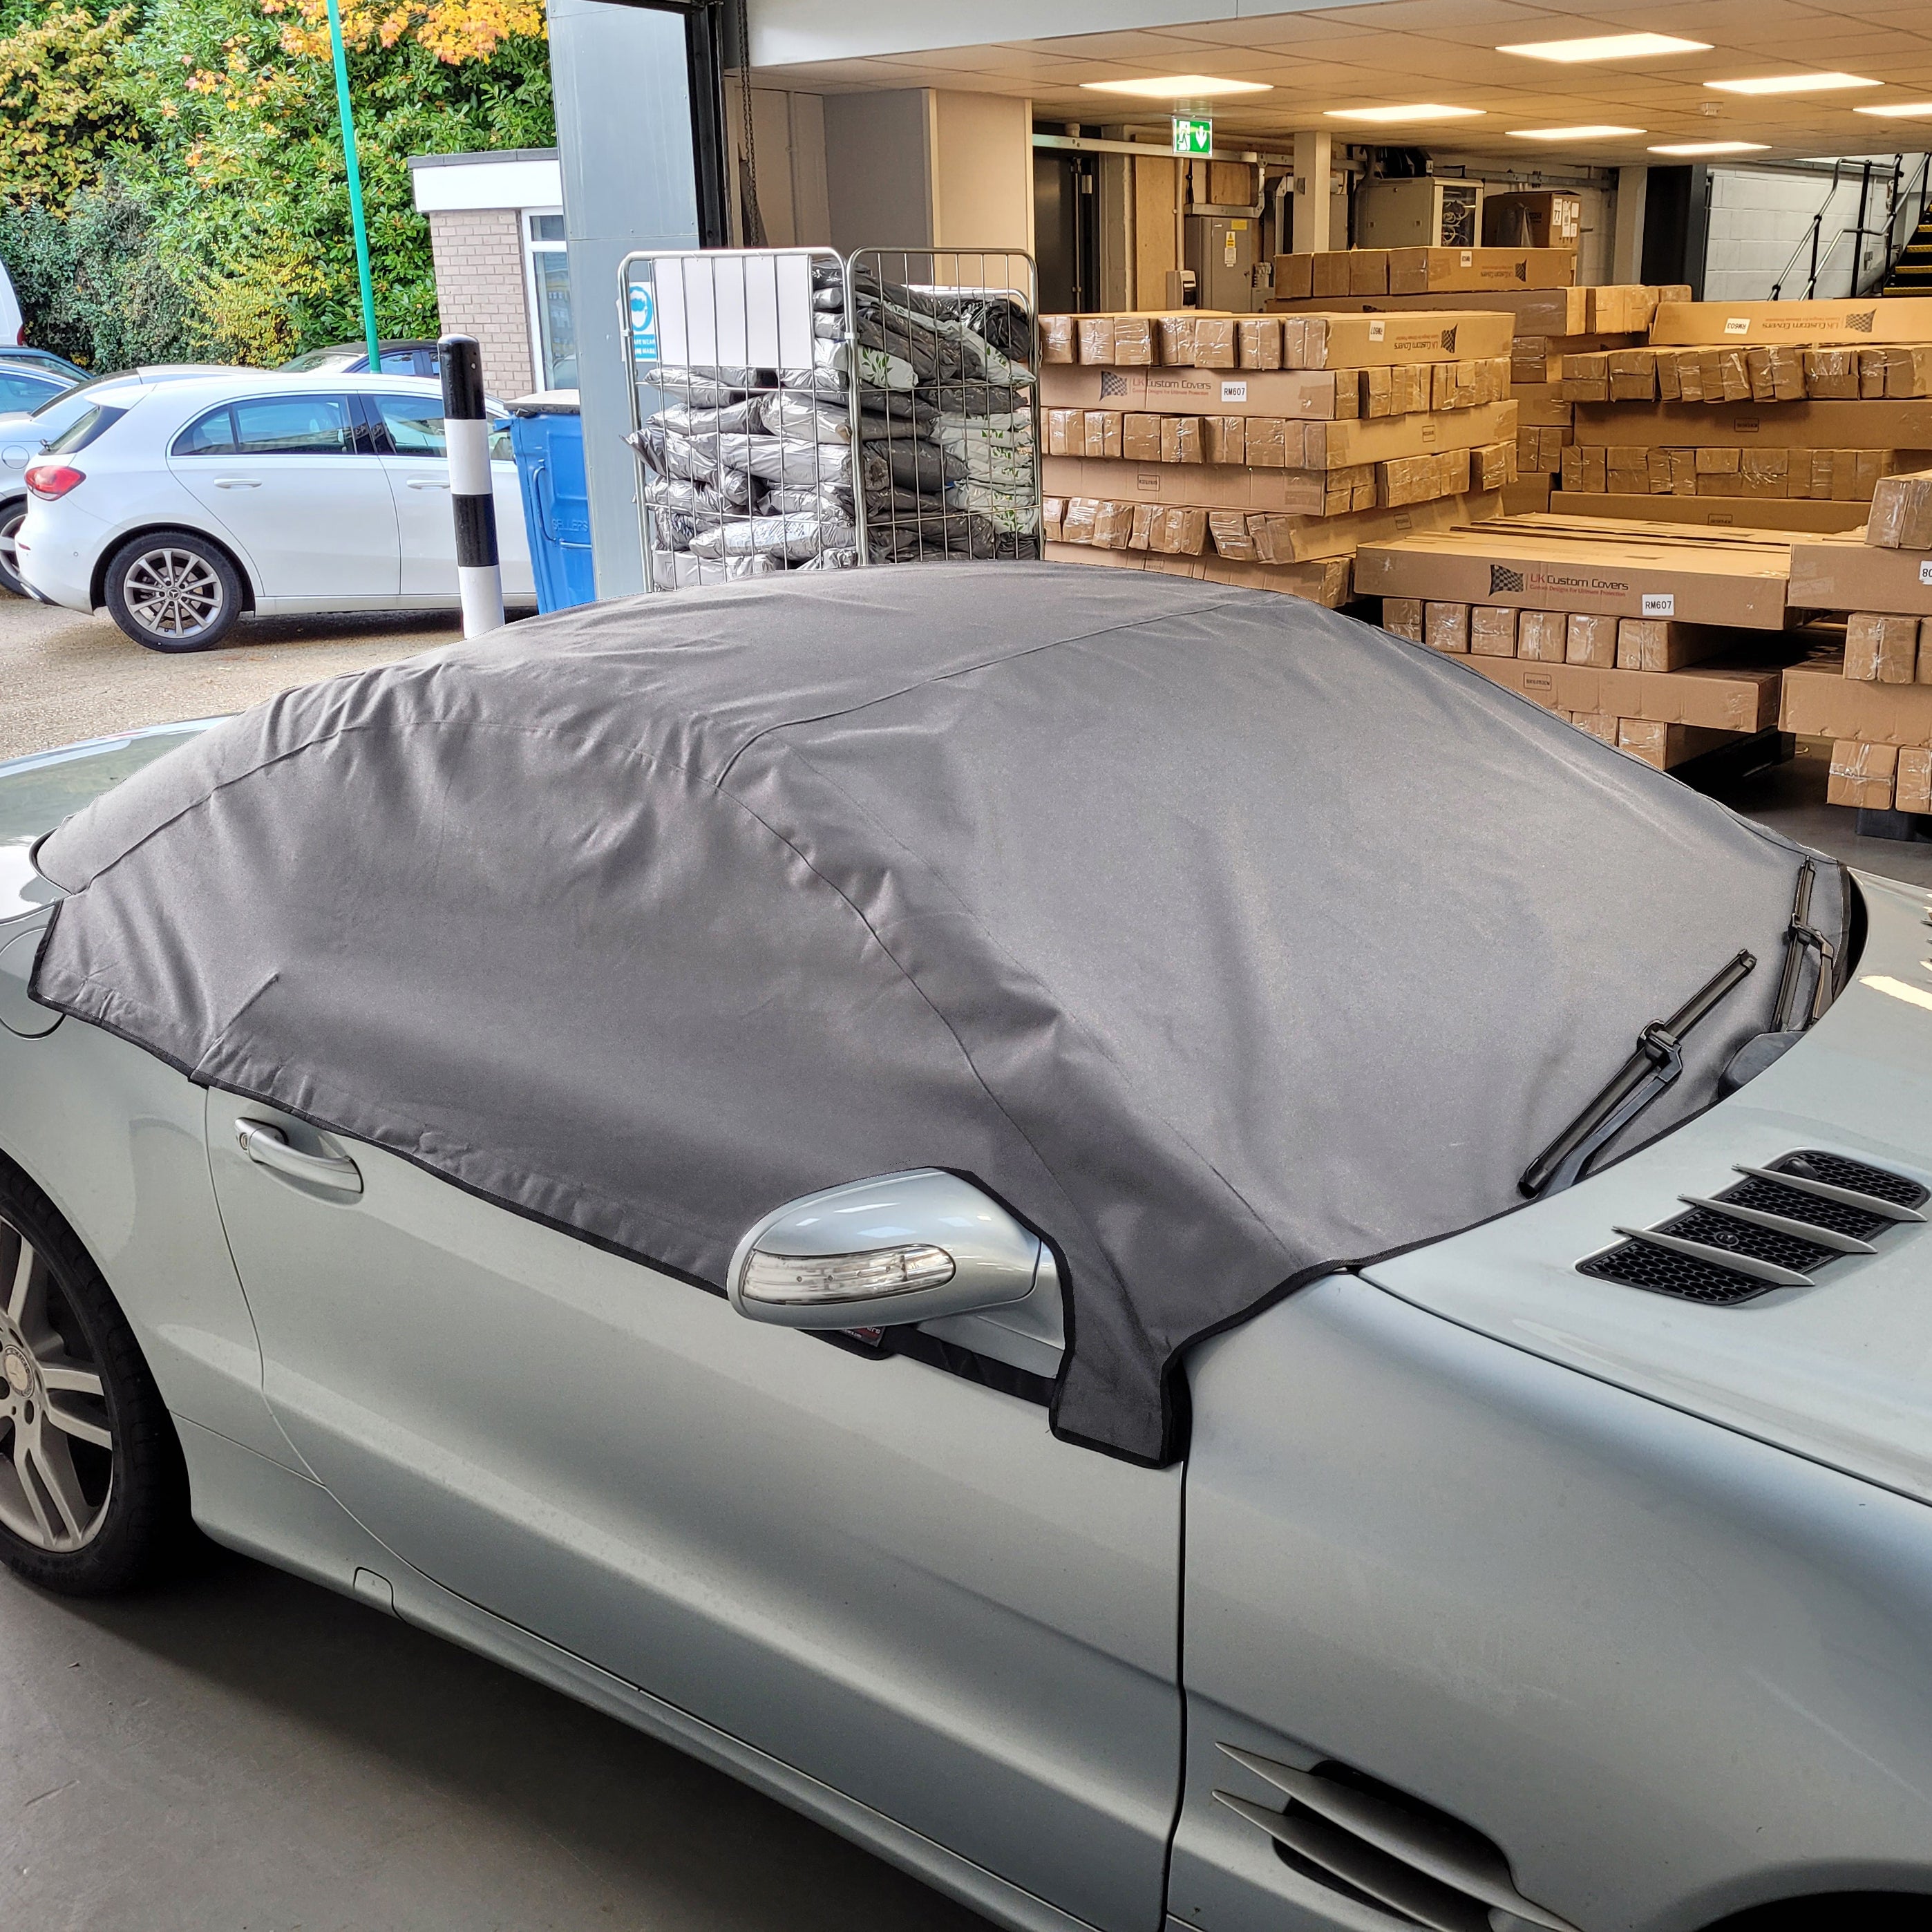 Mercedes SL Class Roof Protector Half Cover | North American